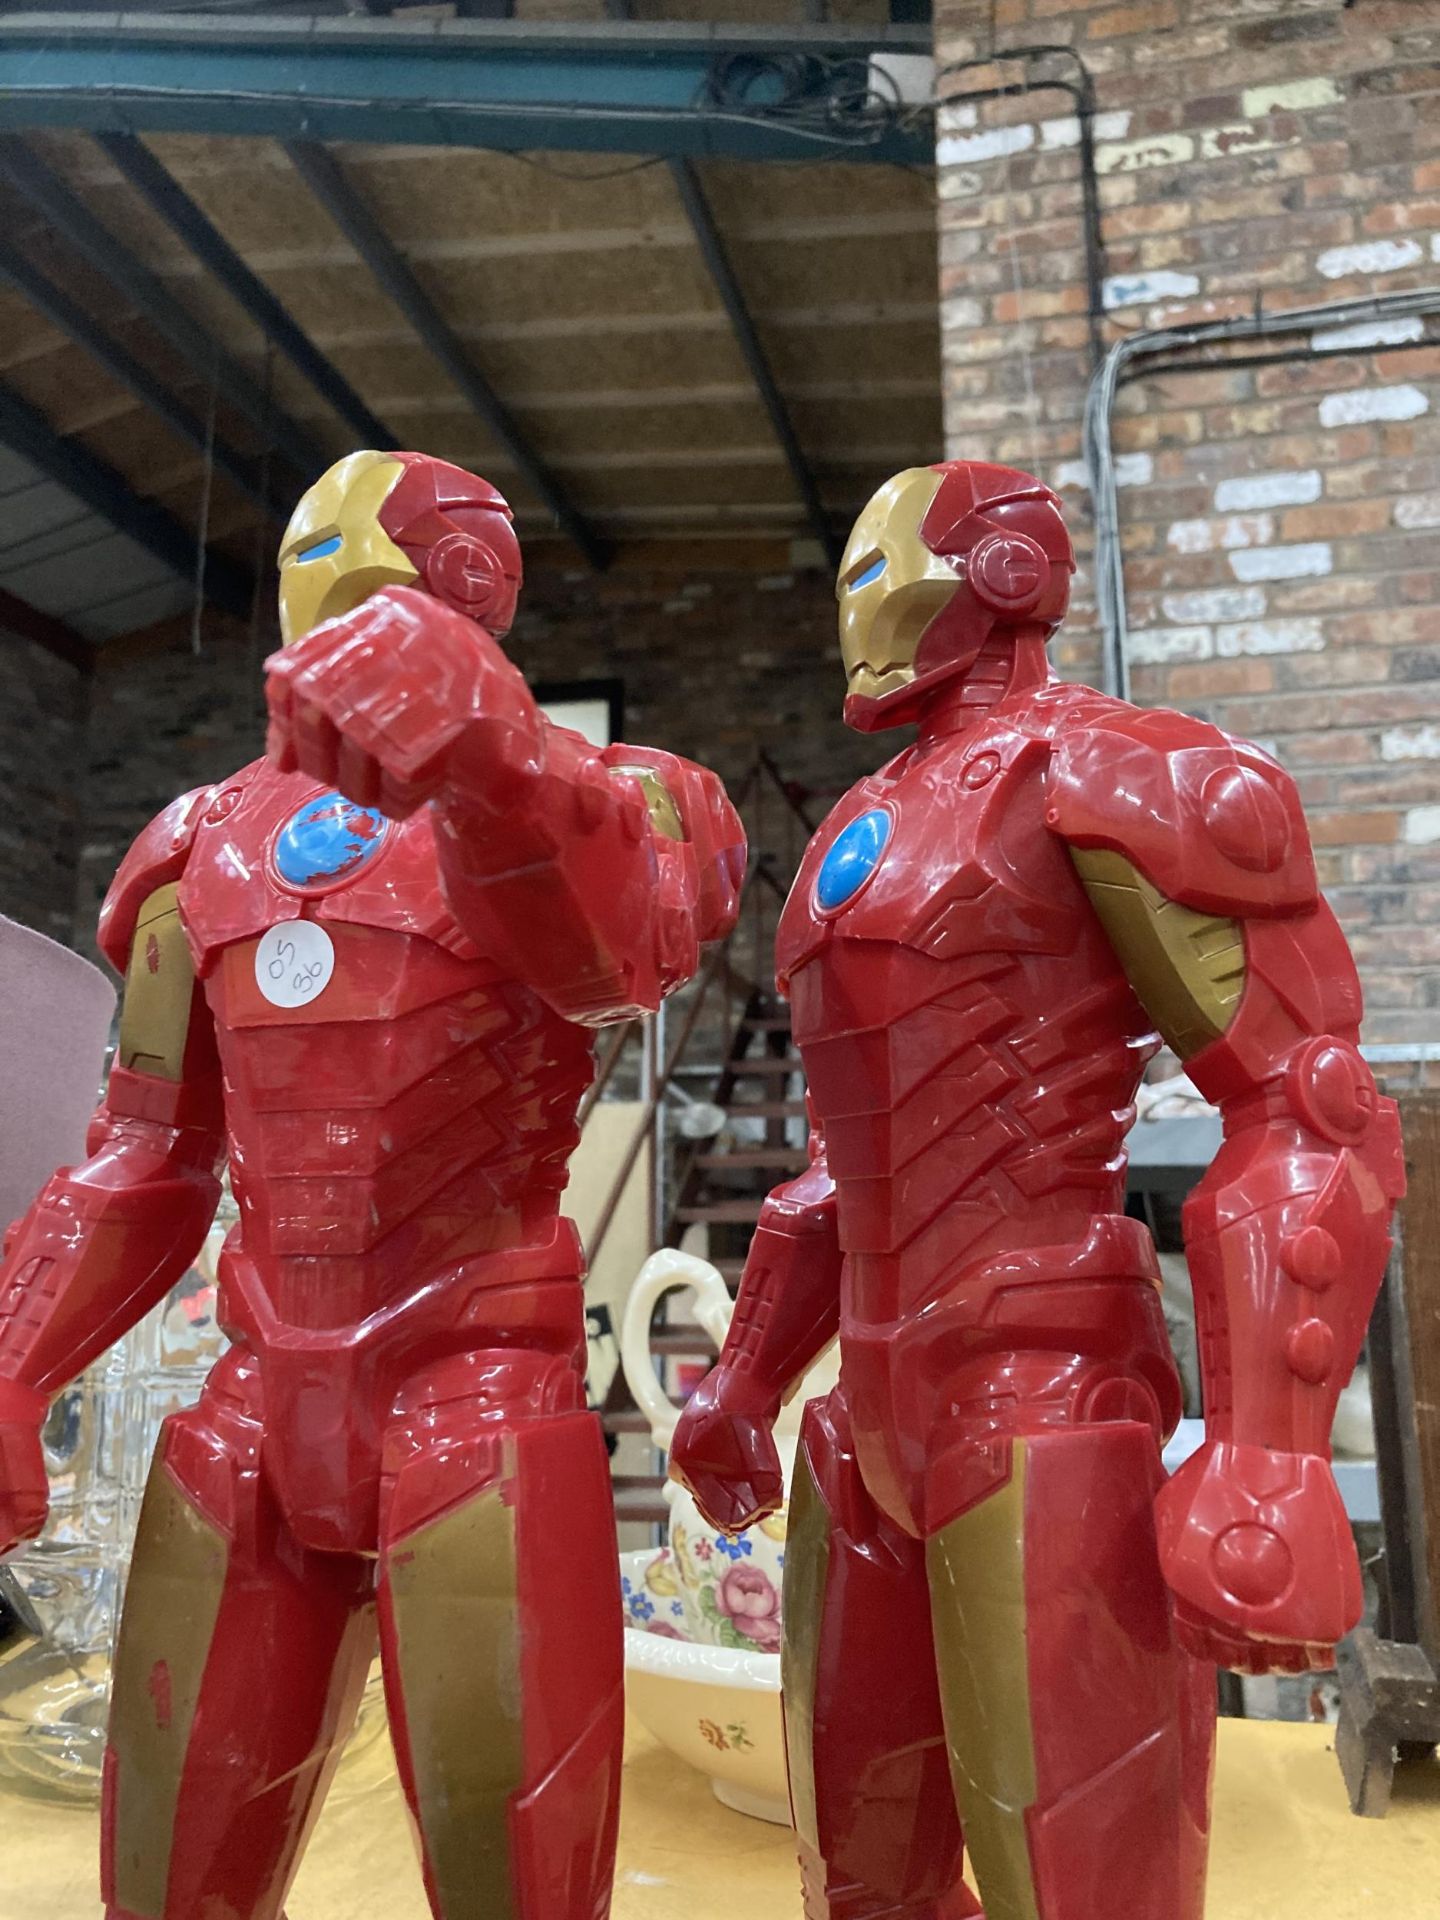 TWO LARGE IRON MAN FIGURES - Image 3 of 3